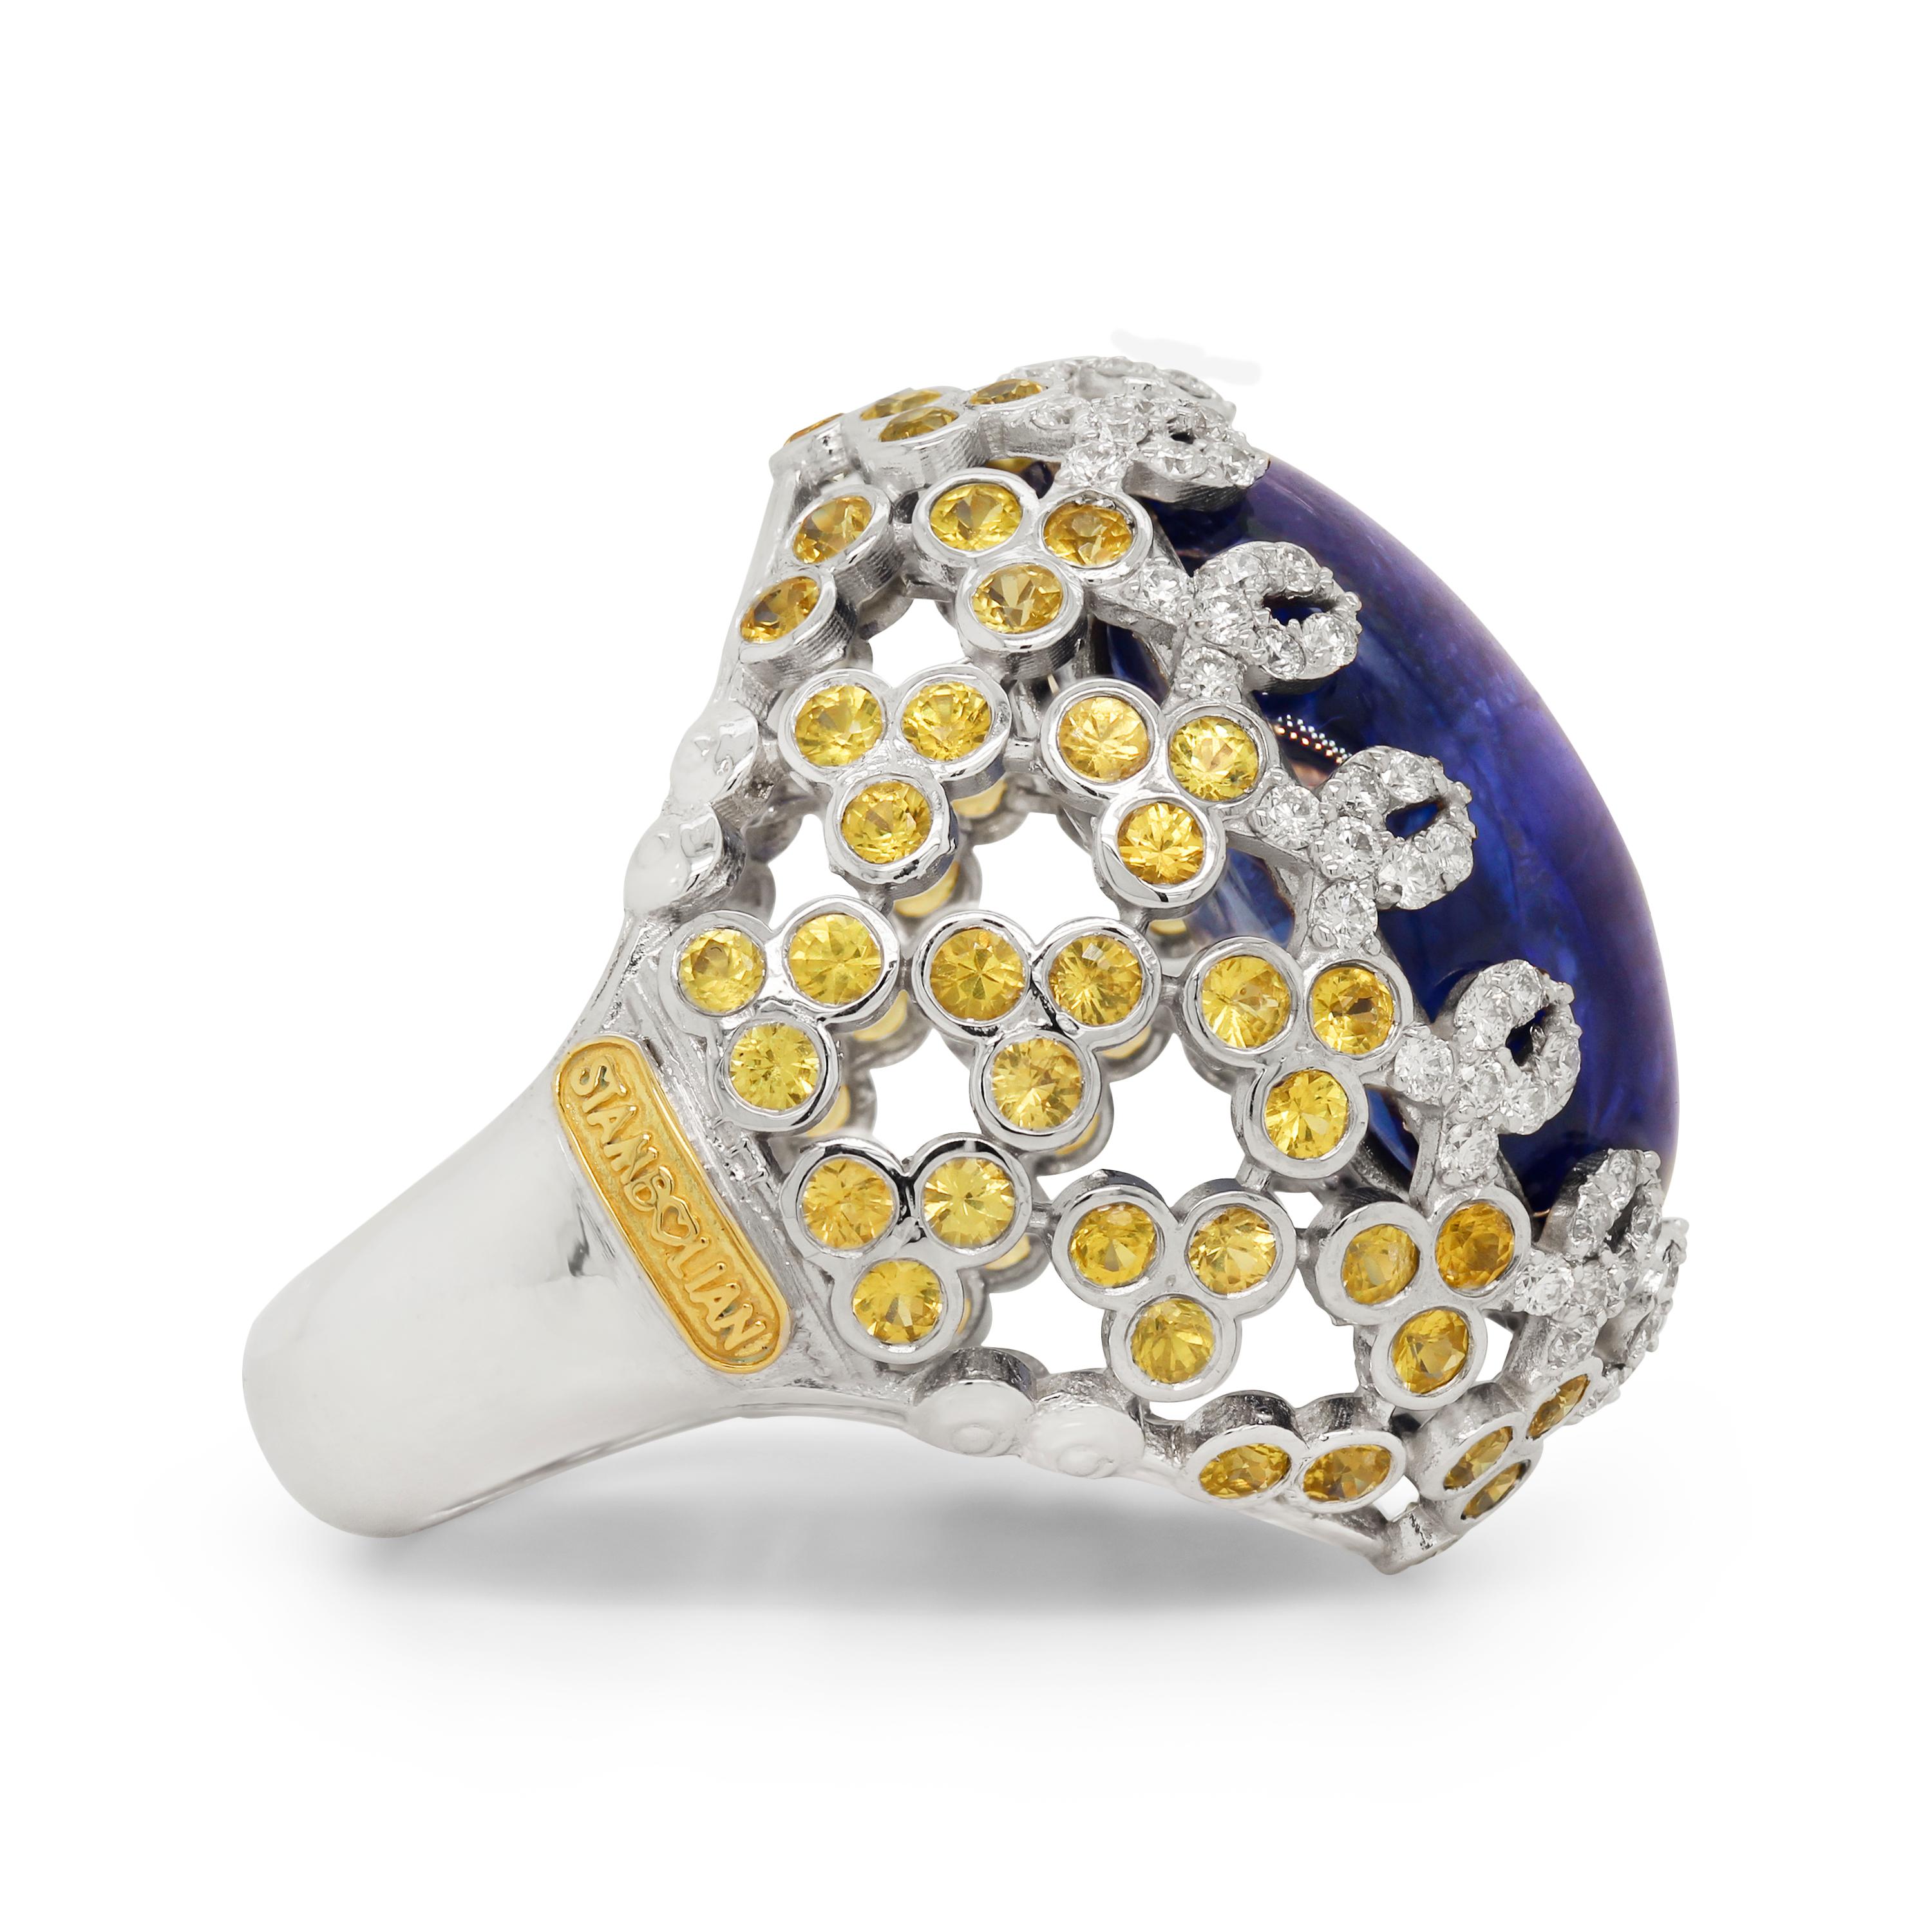 Stambolian 18K Gold AAA Quality Cabochon Tanzanite Yellow Sapphire Diamonds Ring

This is a one-of-a-kind dome ring that features a perfect cabochon-cut Tanzanite in a basket style setting with yellow sapphires and diamonds set all throughout the